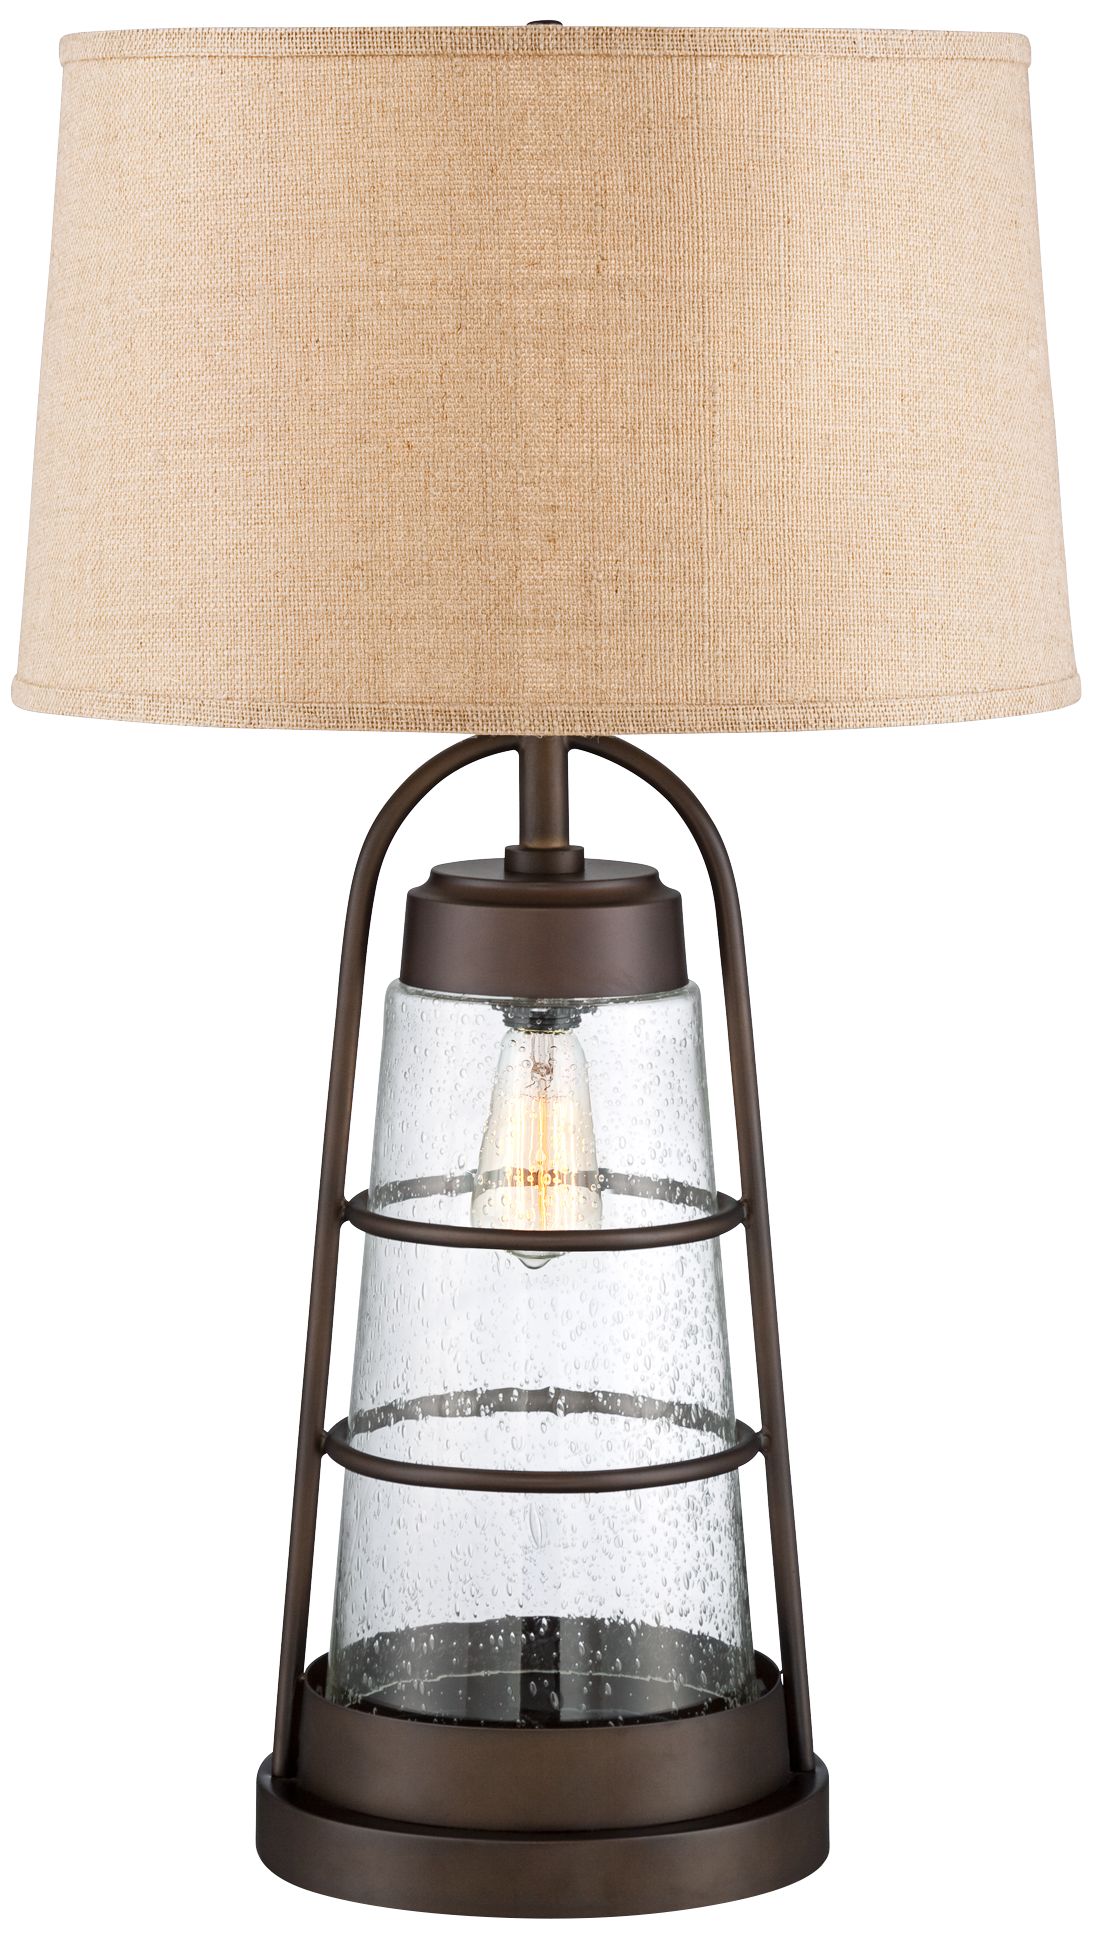 lantern table lamp with shade